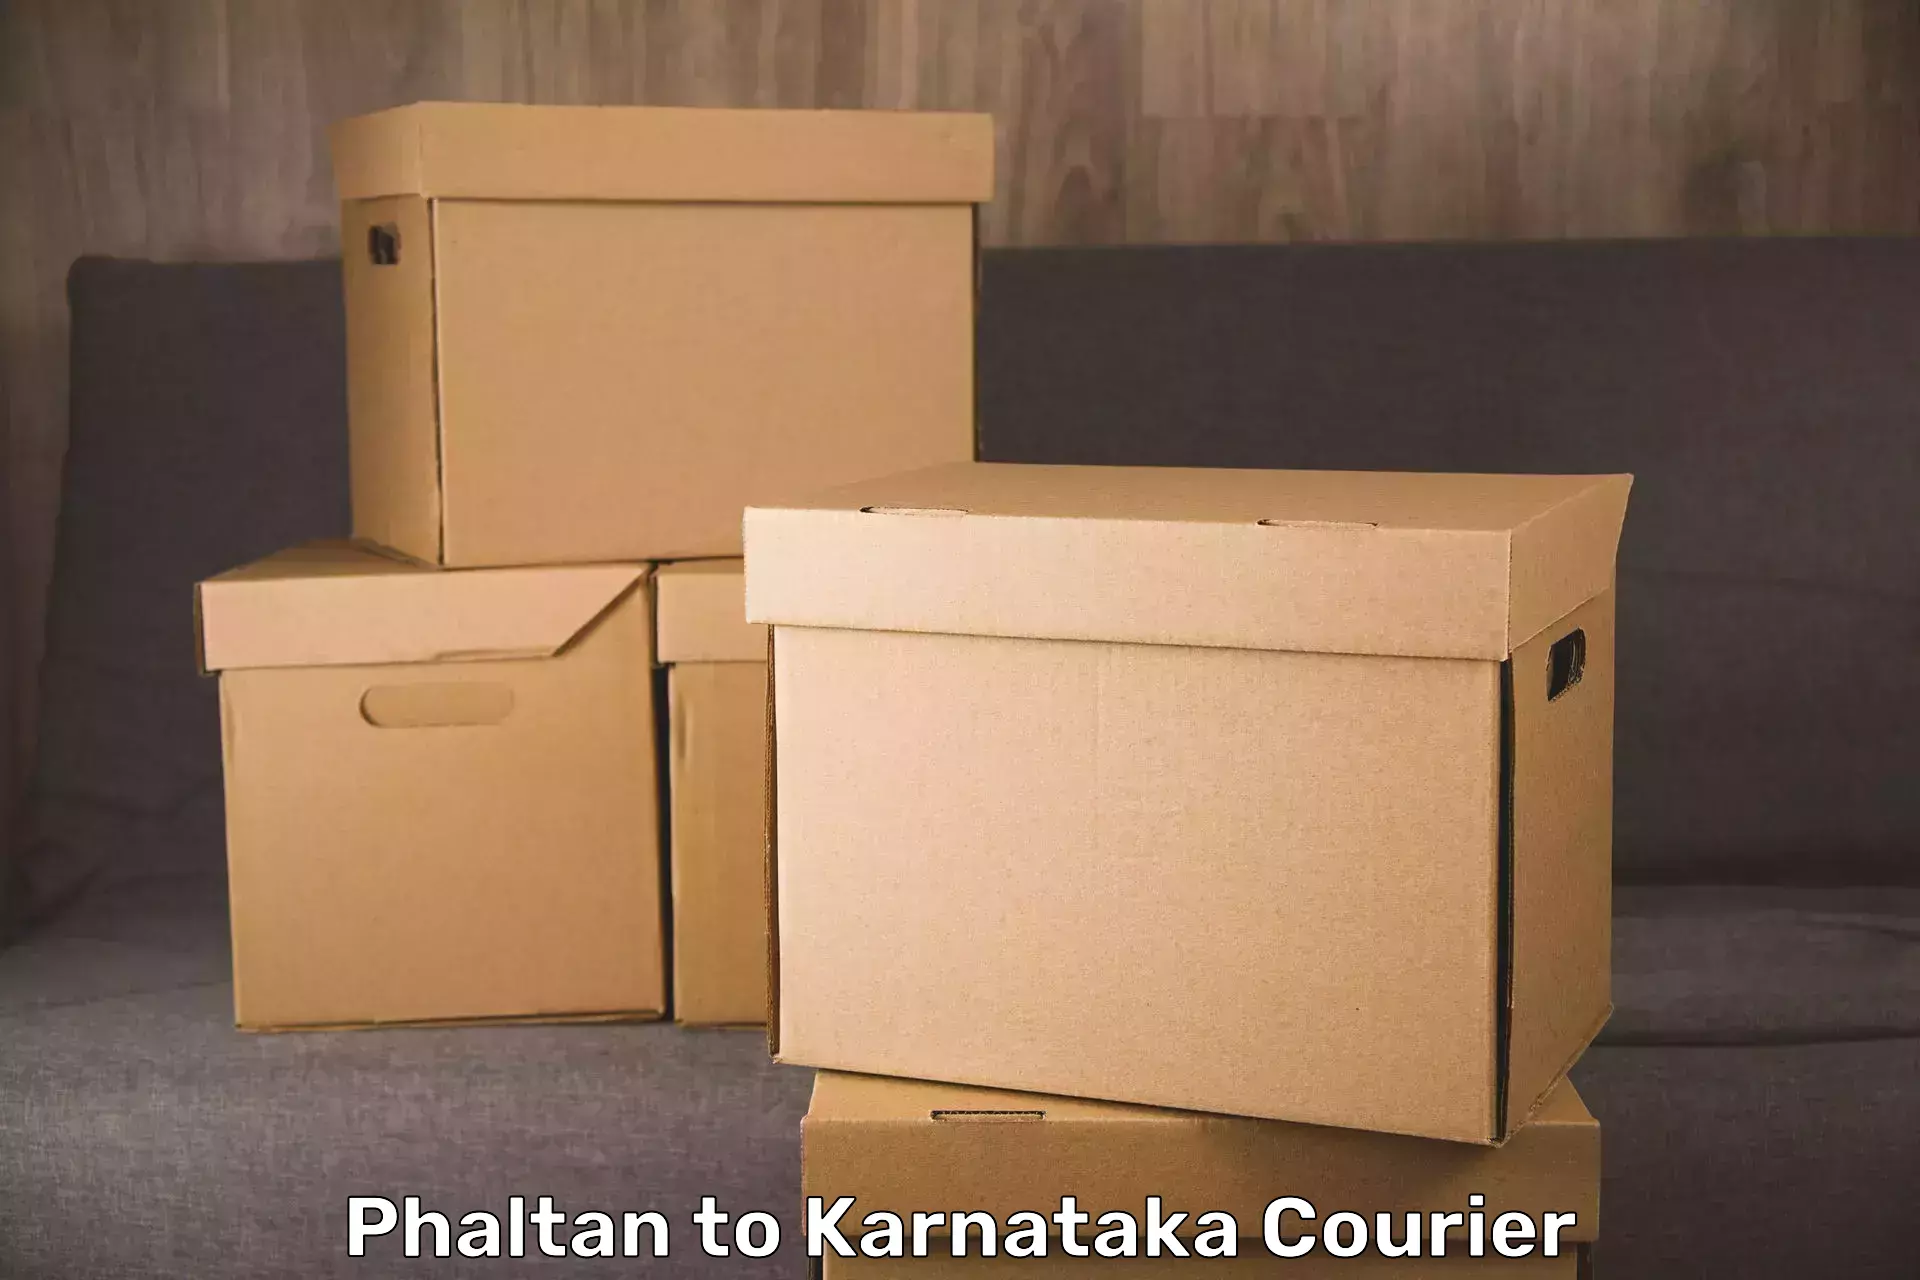 Luggage delivery network Phaltan to Yadgir